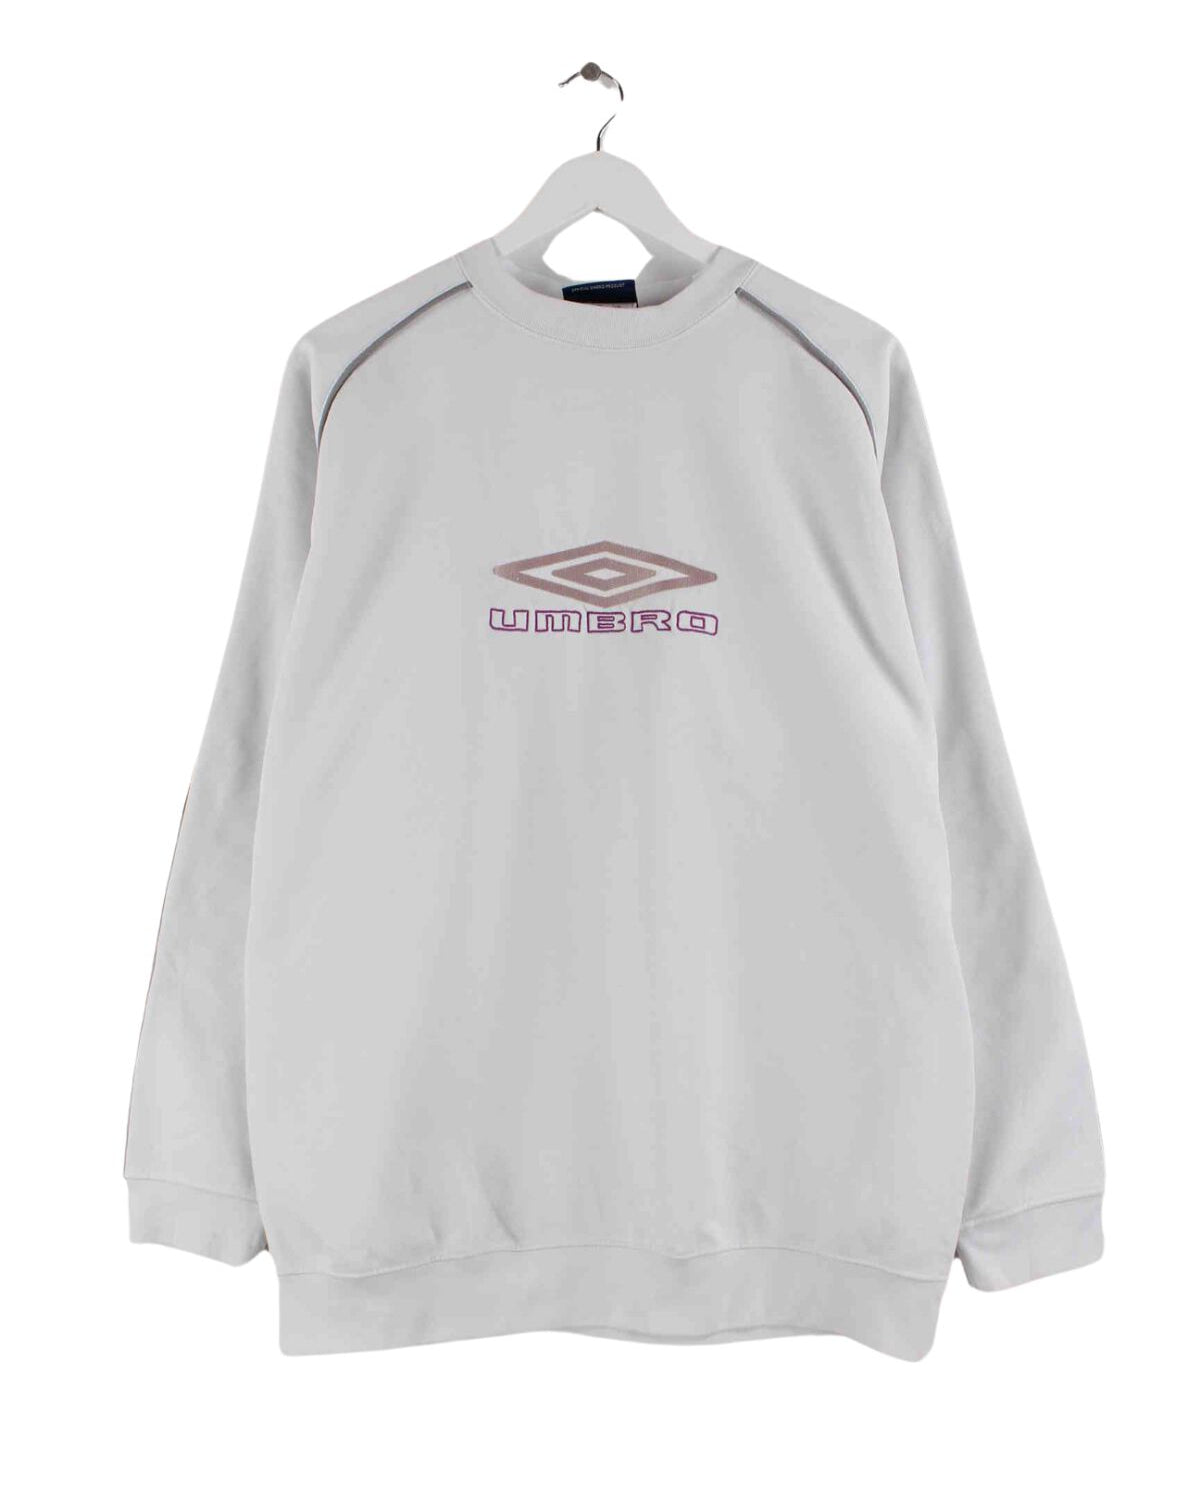 Umbro 90s Vintage Embroidered Sweater Weiß L (front image)